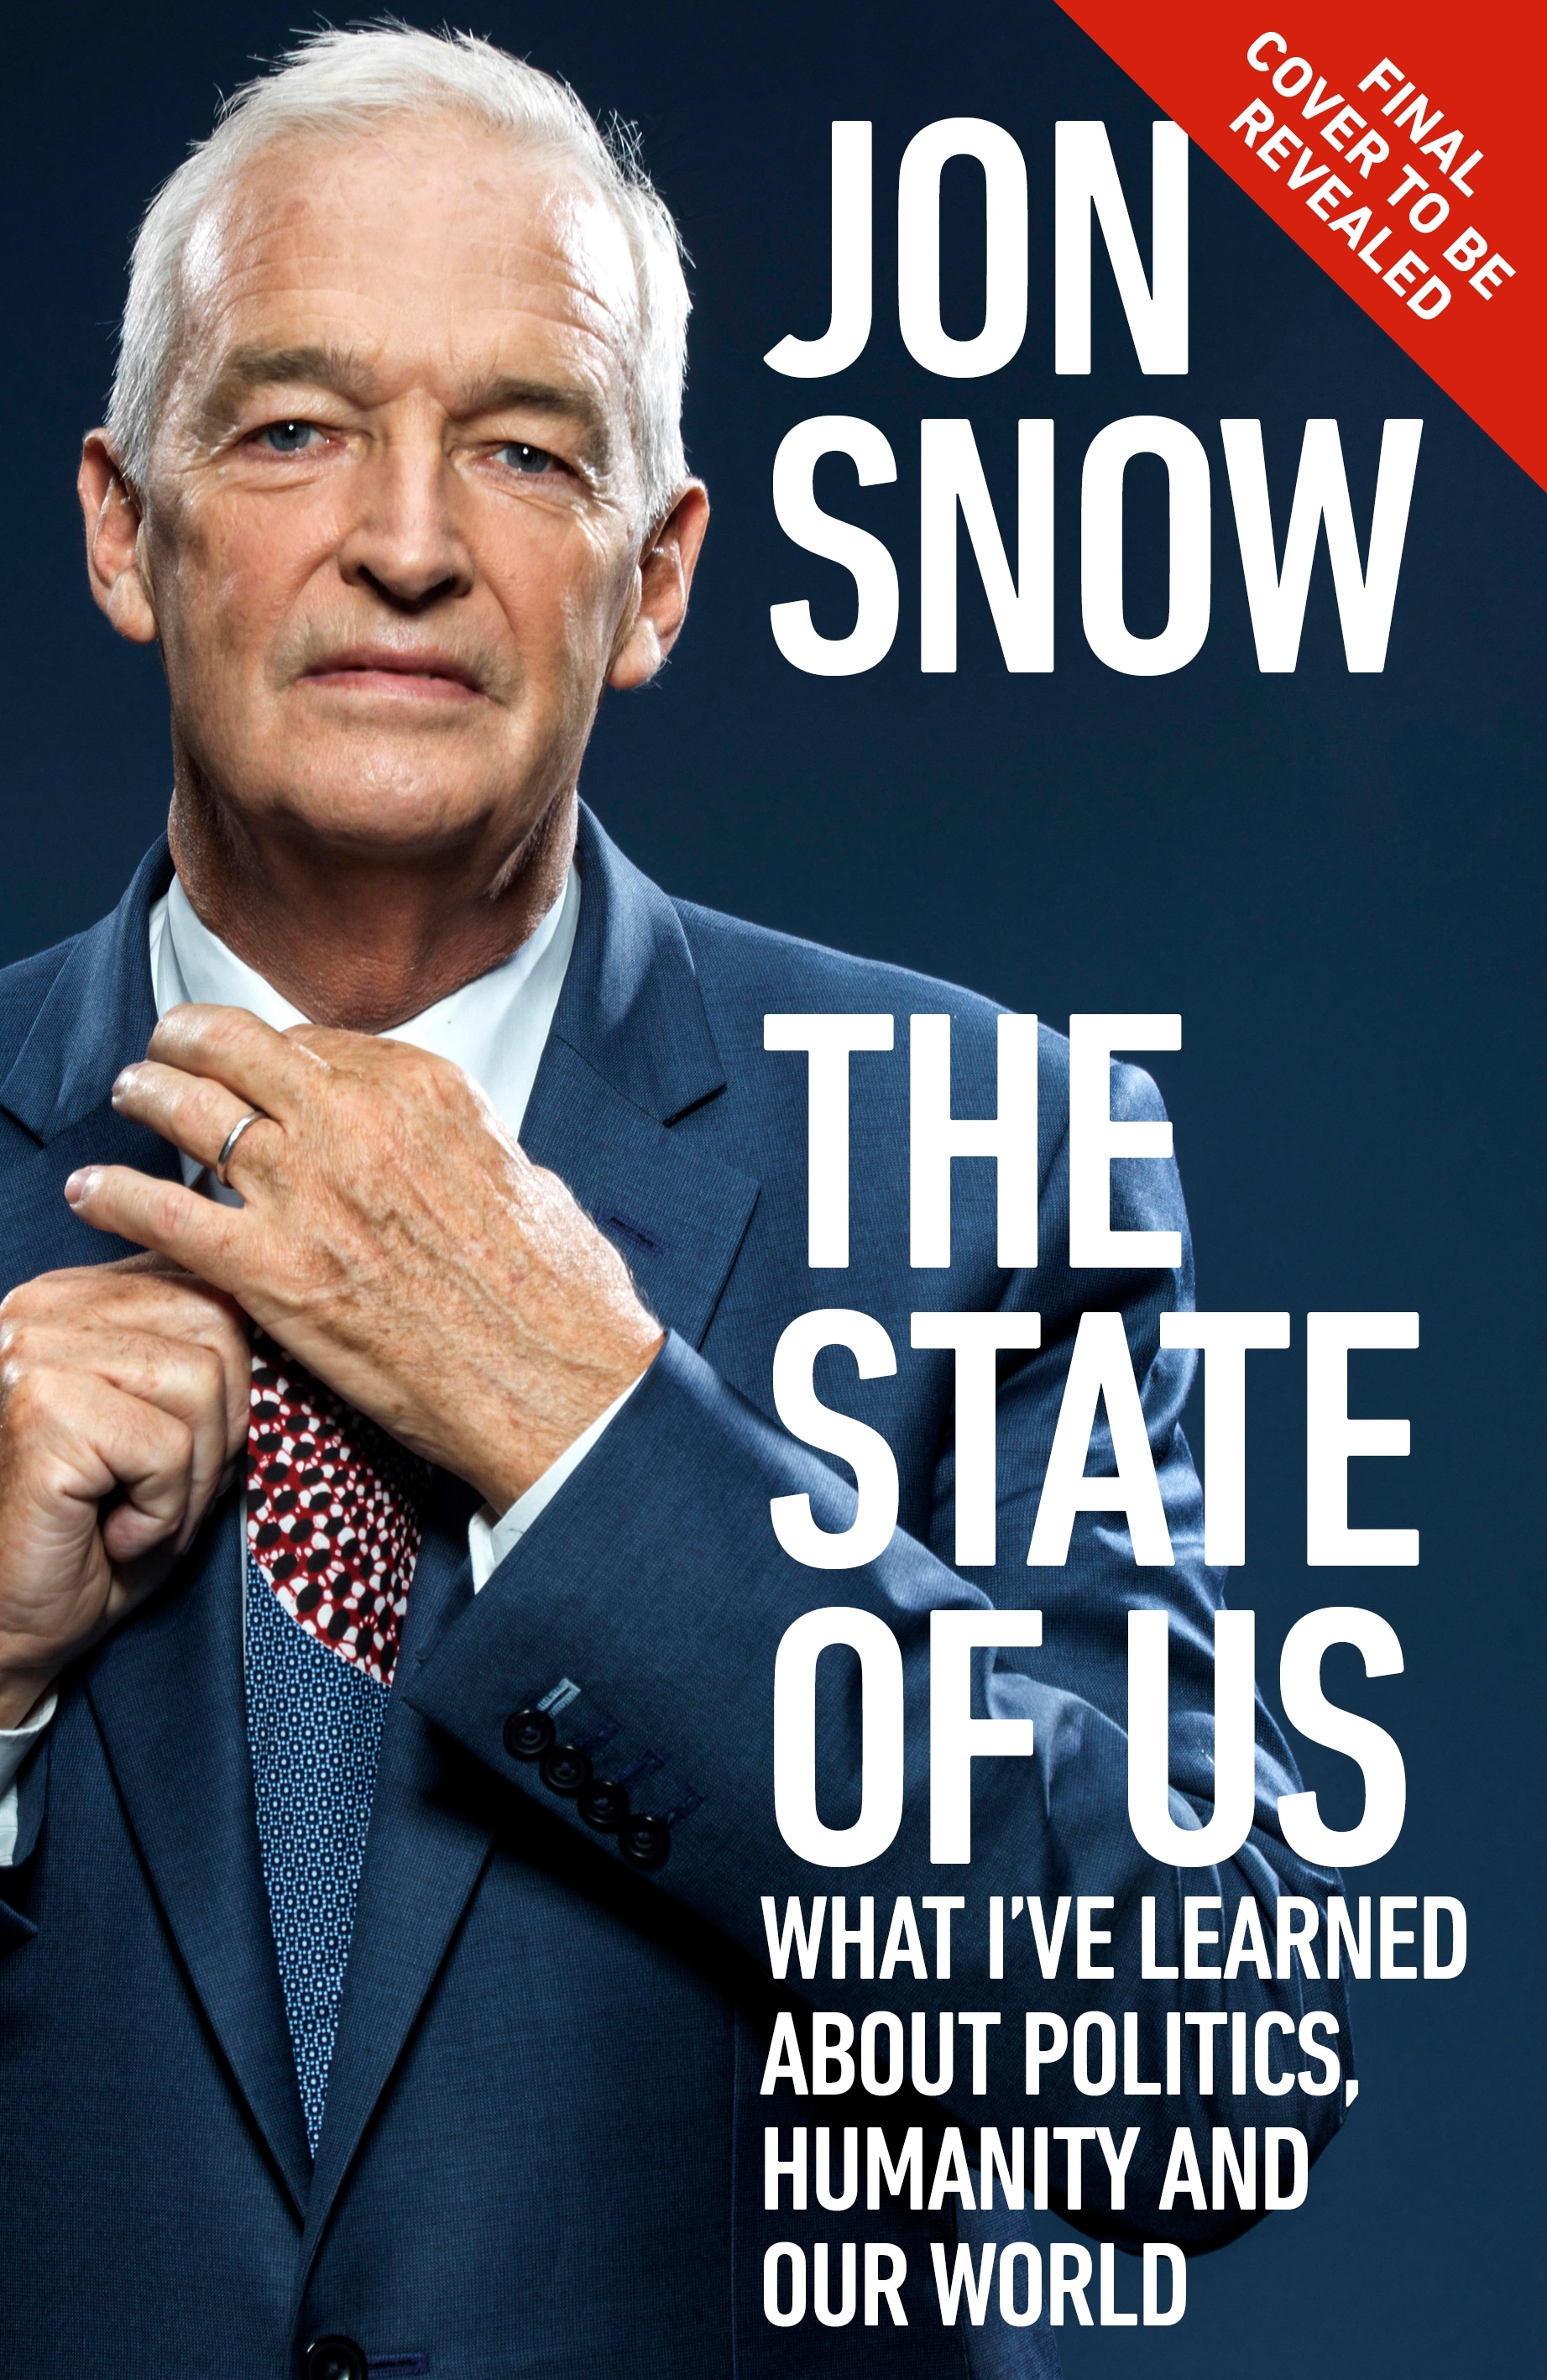 Book “The State of Us” by Jon Snow — October 13, 2022